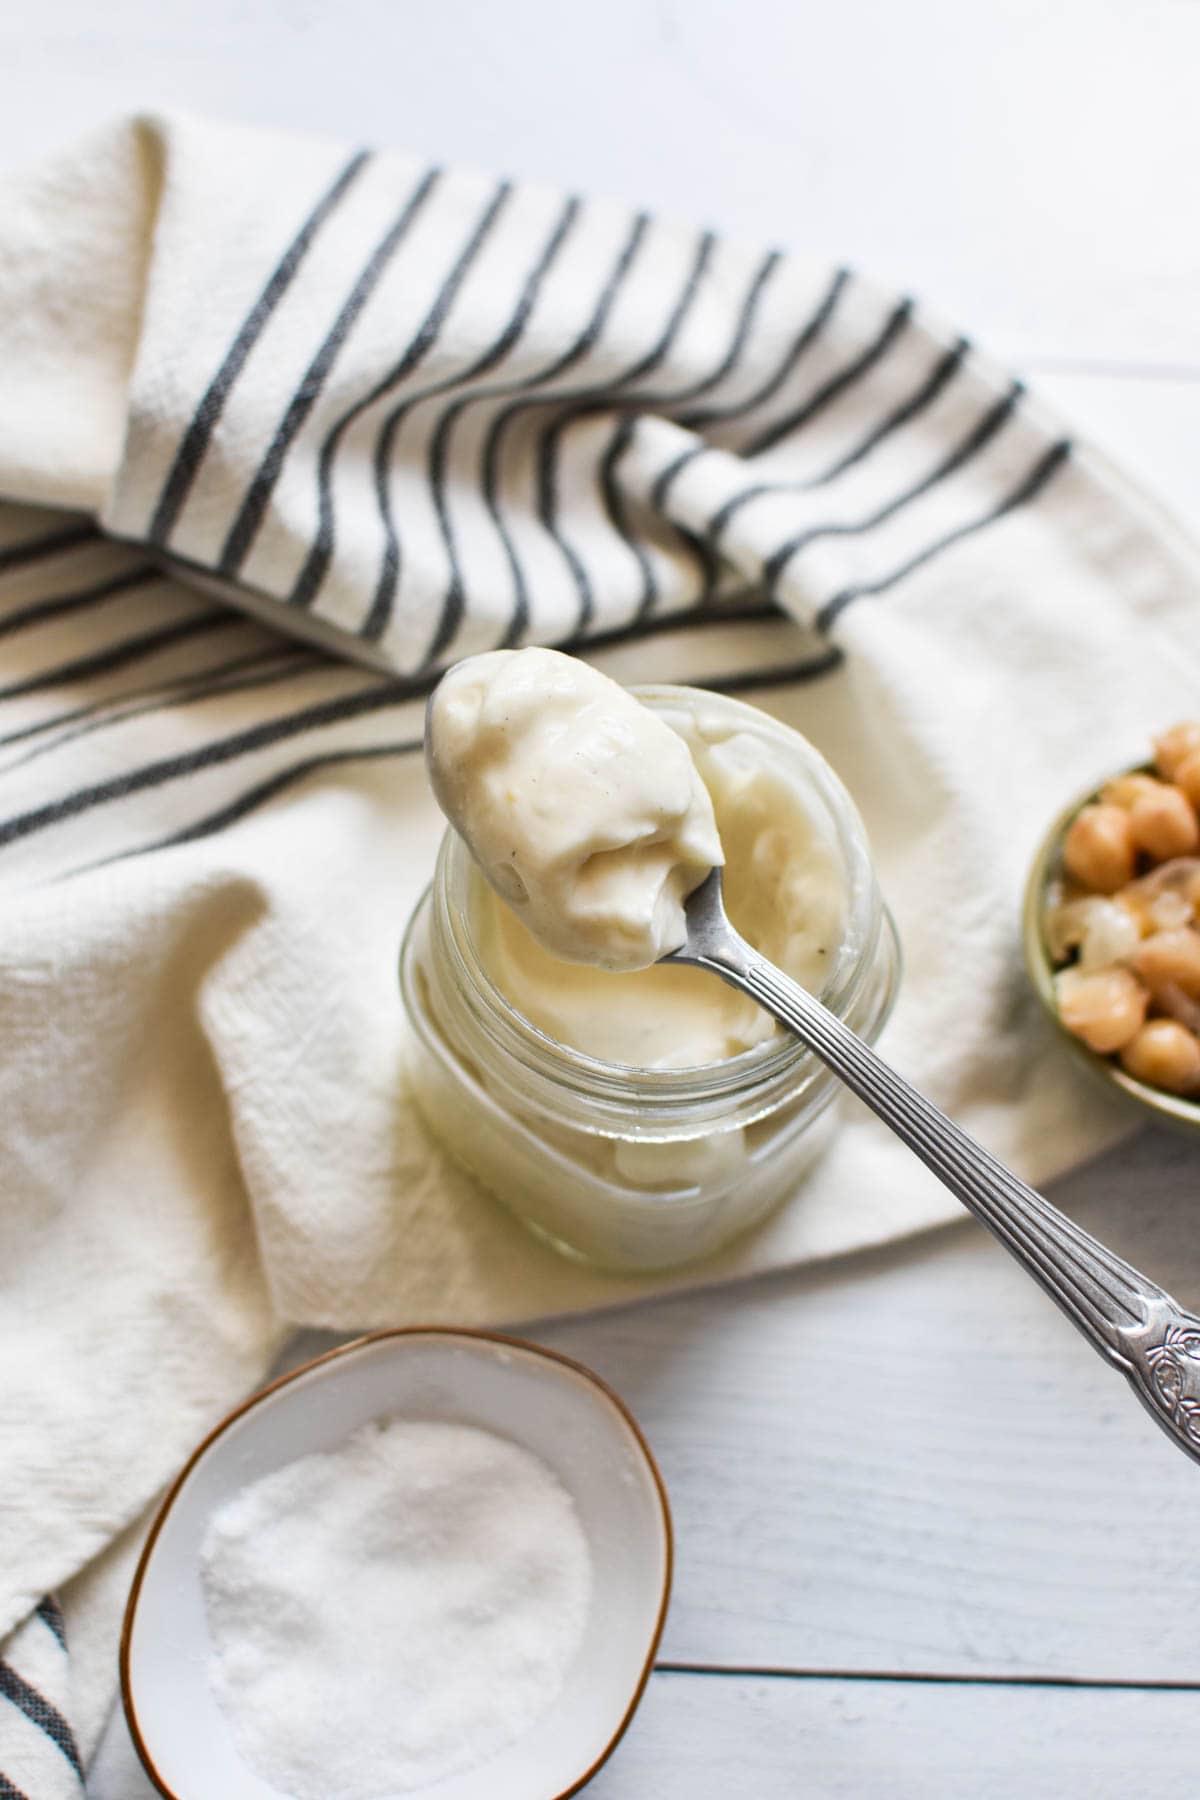 A spoon resting on top of a jar of egg free mayo next to chickpeas.